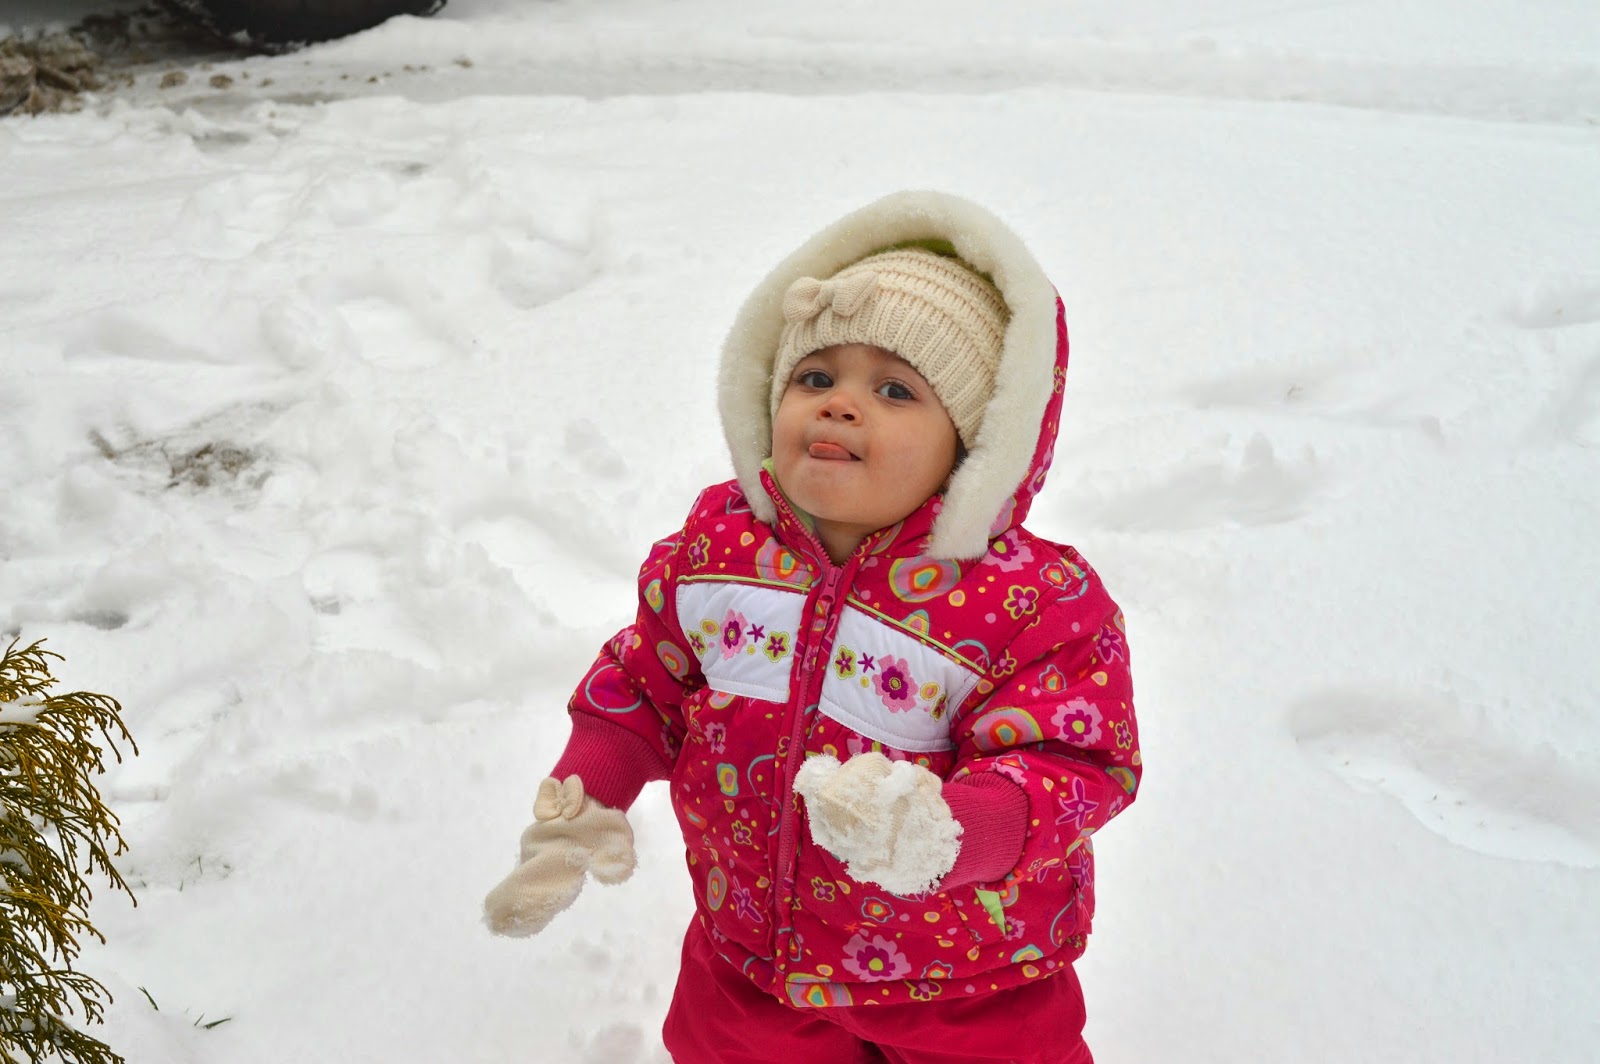 Snow Day! | Baby’s First Snow!